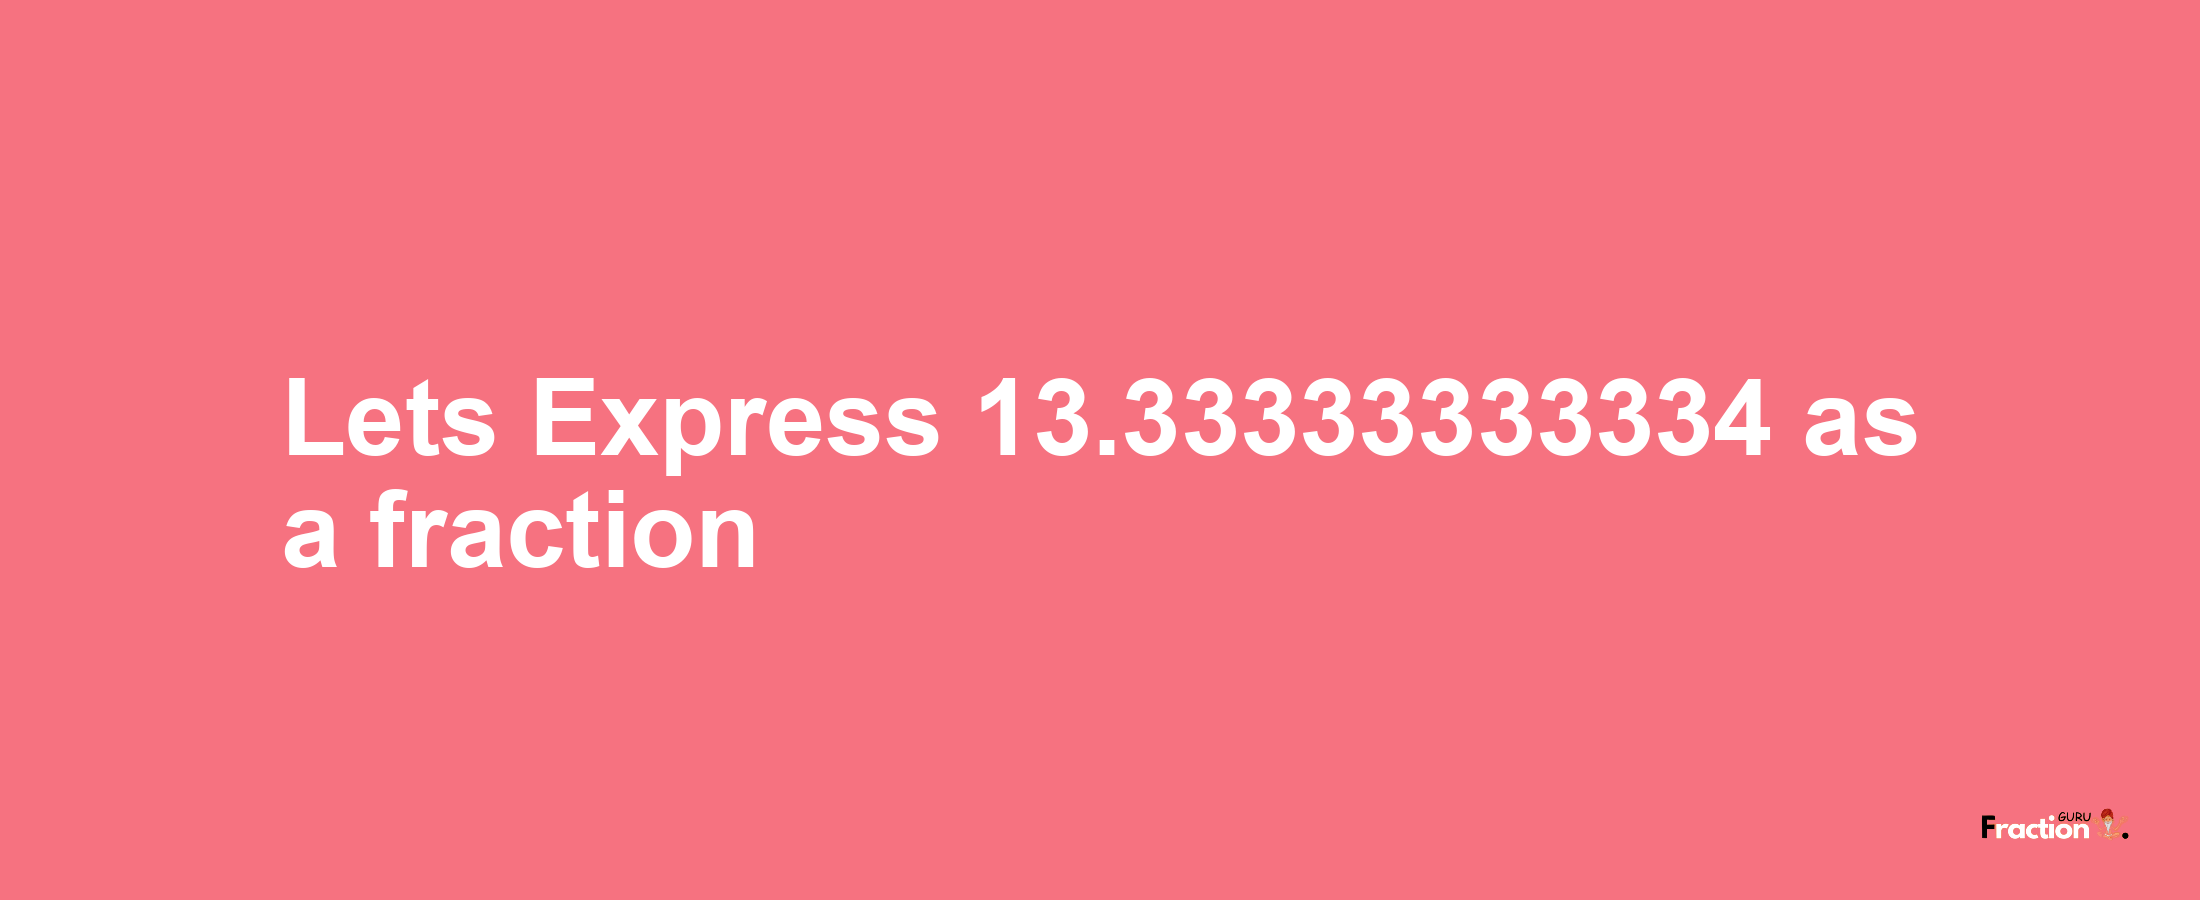 Lets Express 13.33333333334 as afraction